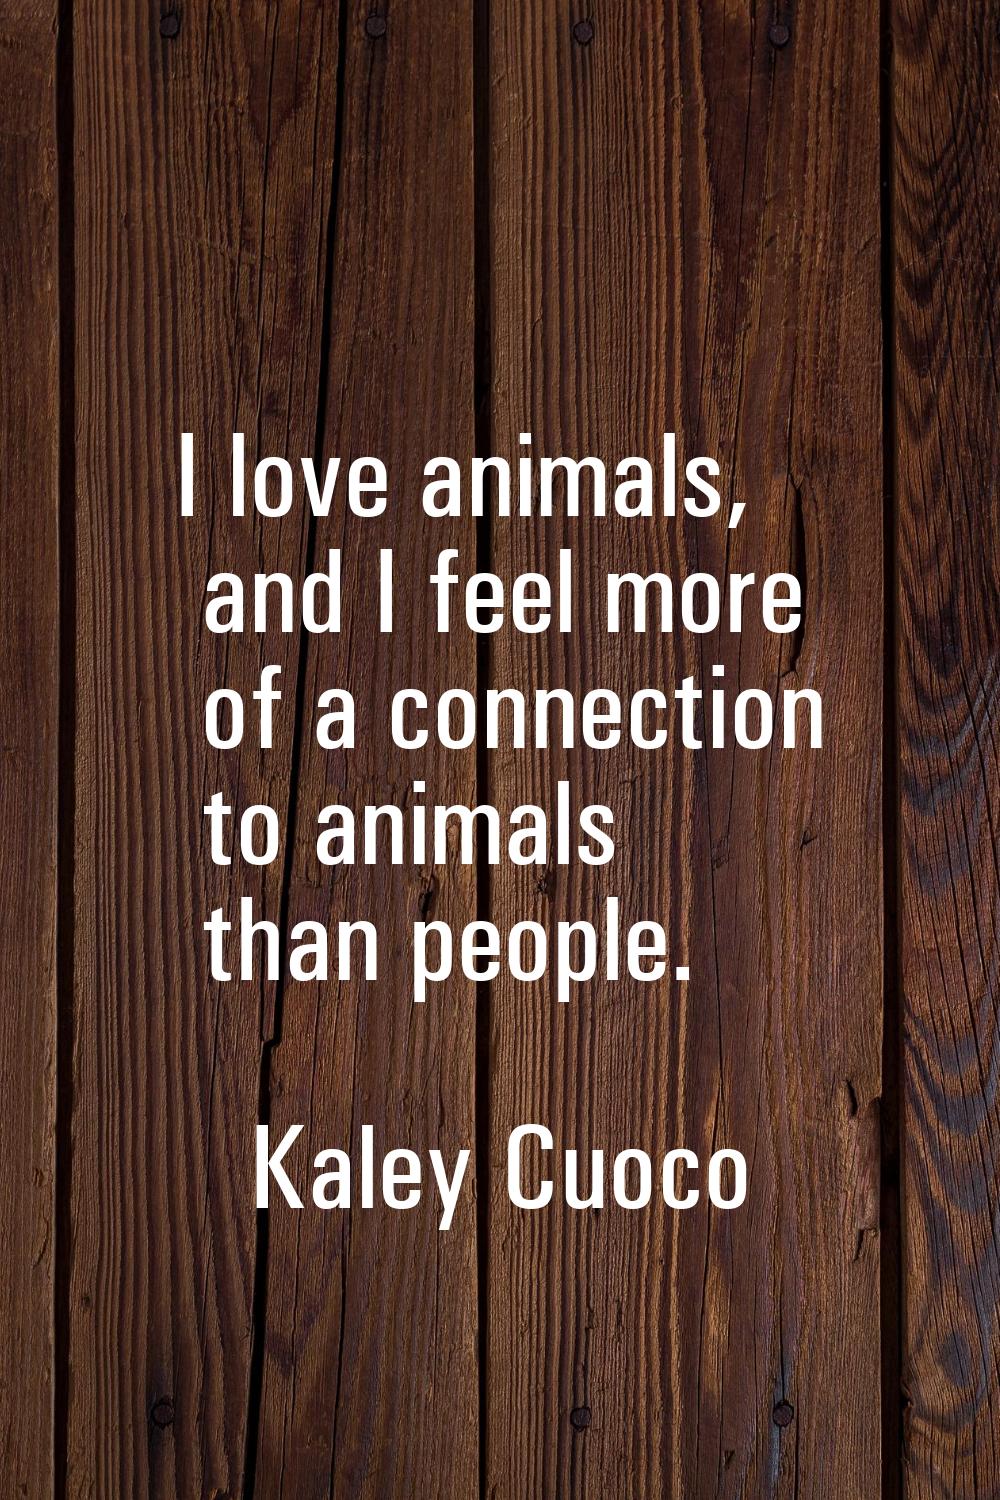 I love animals, and I feel more of a connection to animals than people.